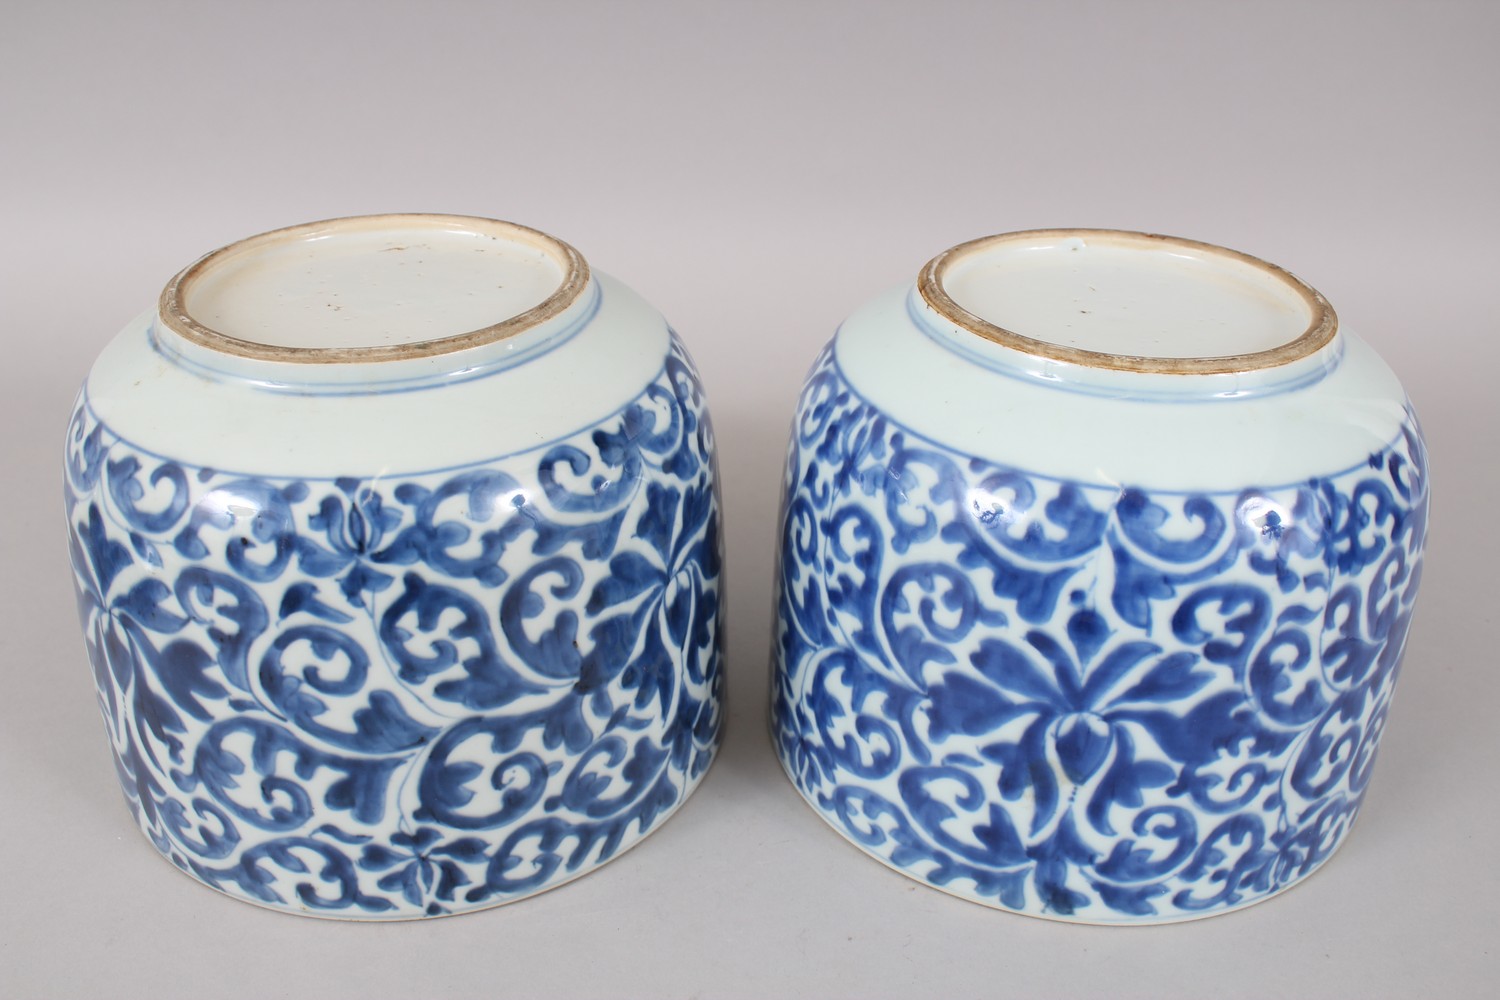 A GOOD PAIR OF QIANLONG CHINESE BLUE AND WHITE PORCELAIN BOWLS & COVERS, the decoration of formal - Image 3 of 3